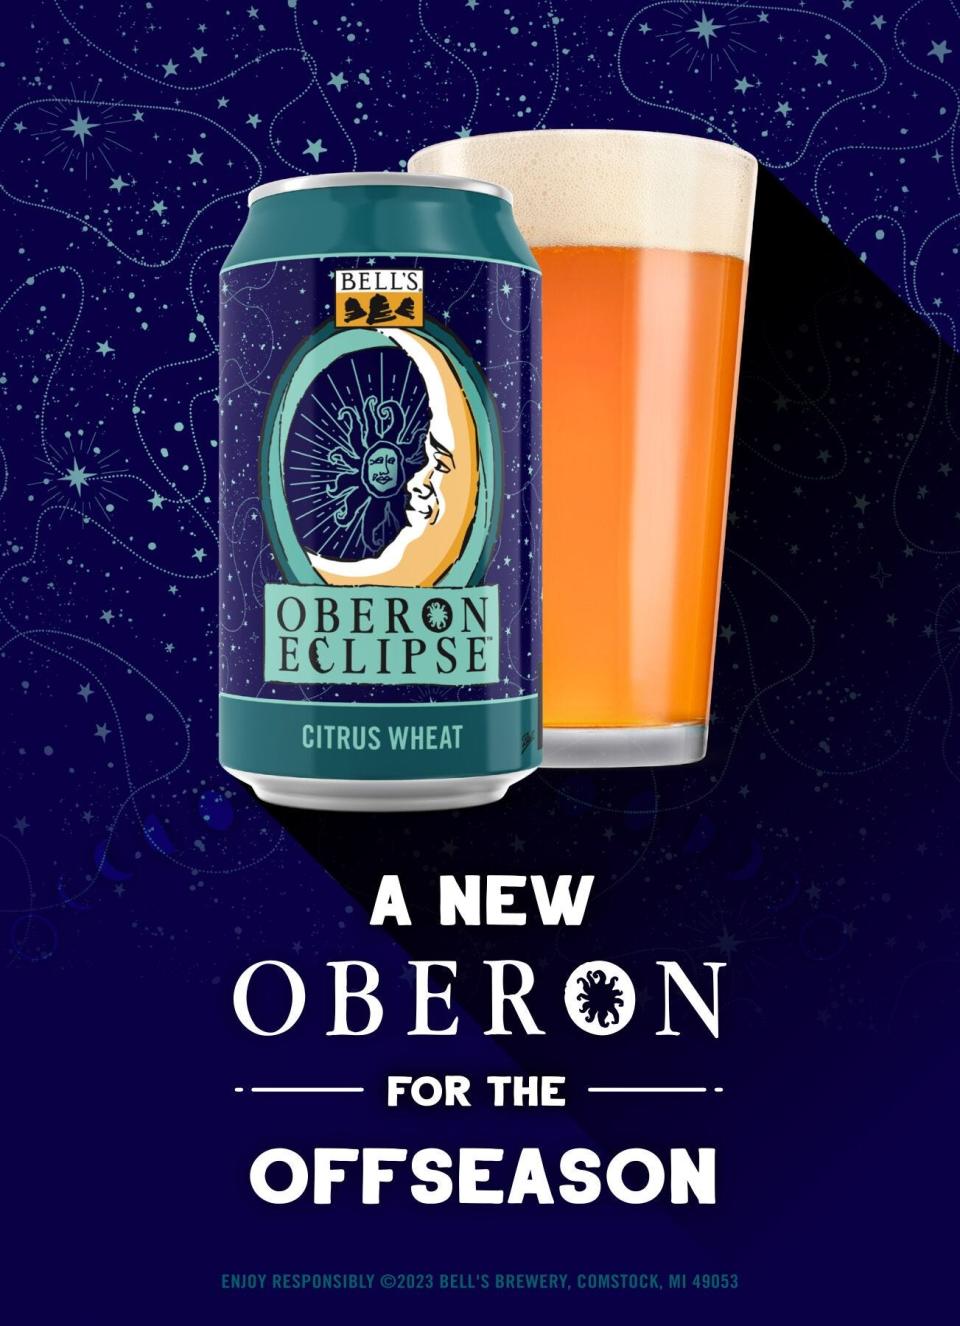 Oberon Eclipse, a new citrus wheat ale from Bell's Brewery.